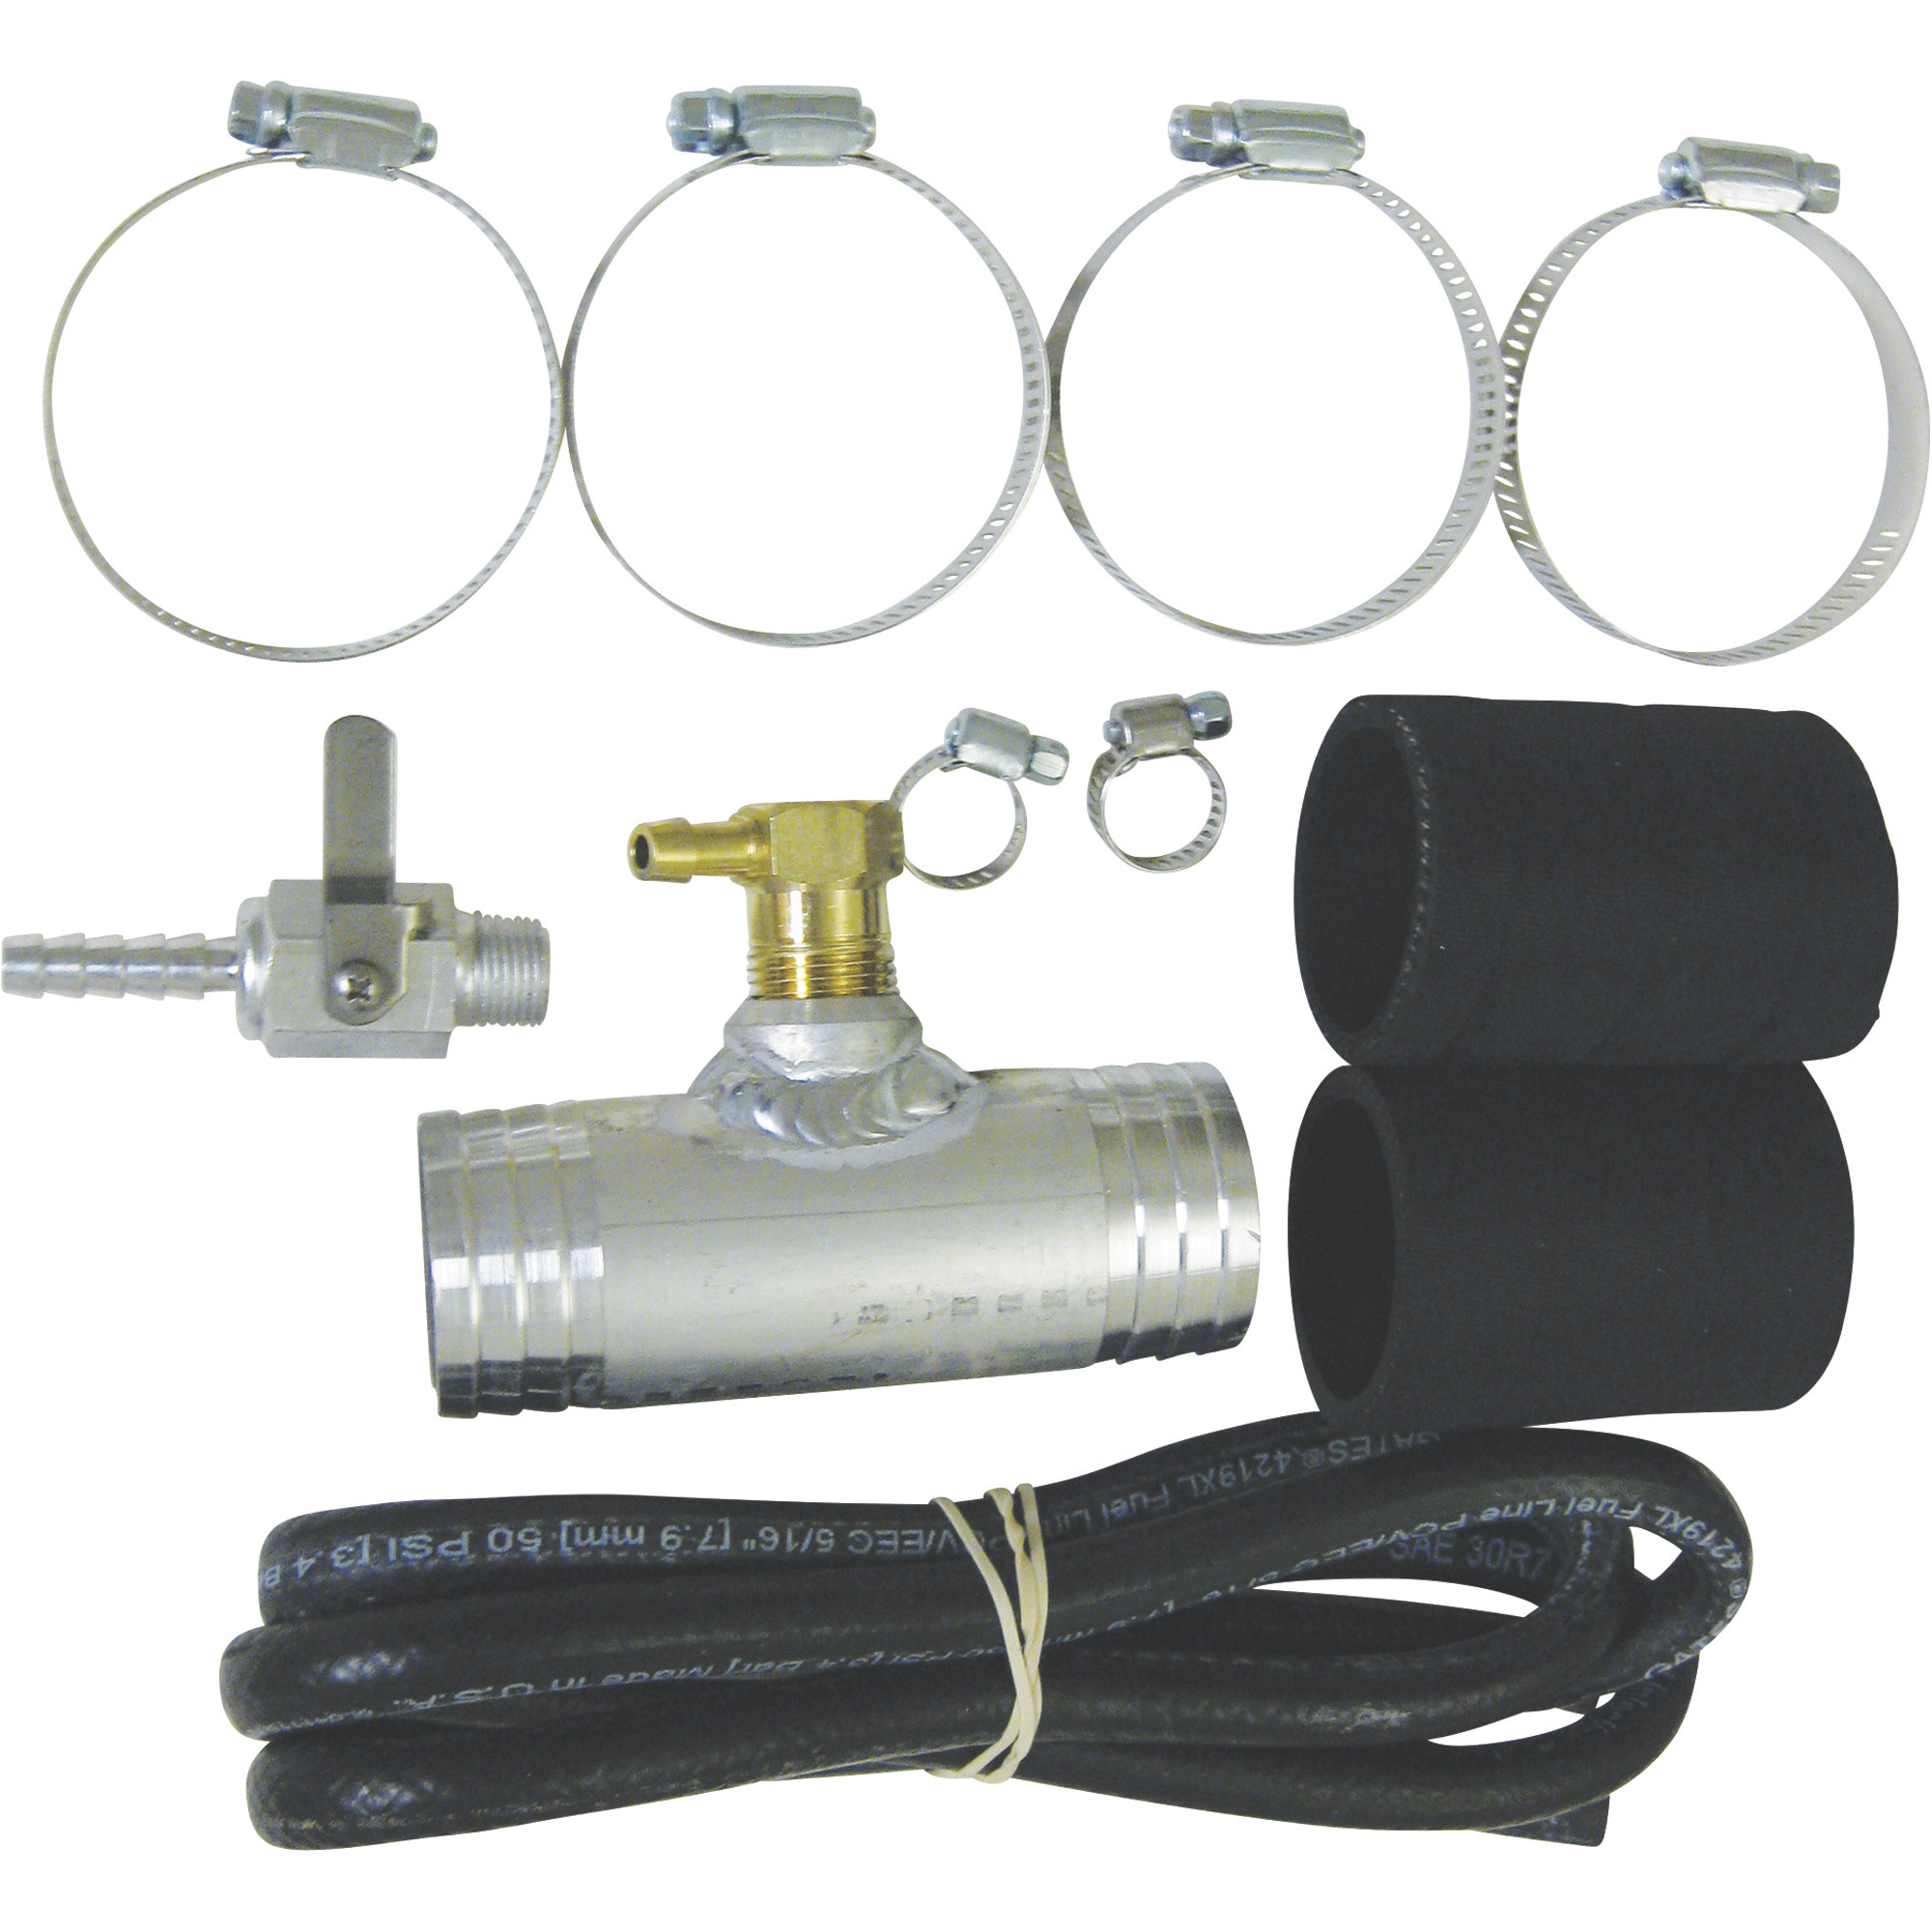 RDS Diesel Install Kit for Auxiliary Transfer Tank Conversion, Fits  2013-Current Dodge Diesel Passenger Trucks, Model# 011408